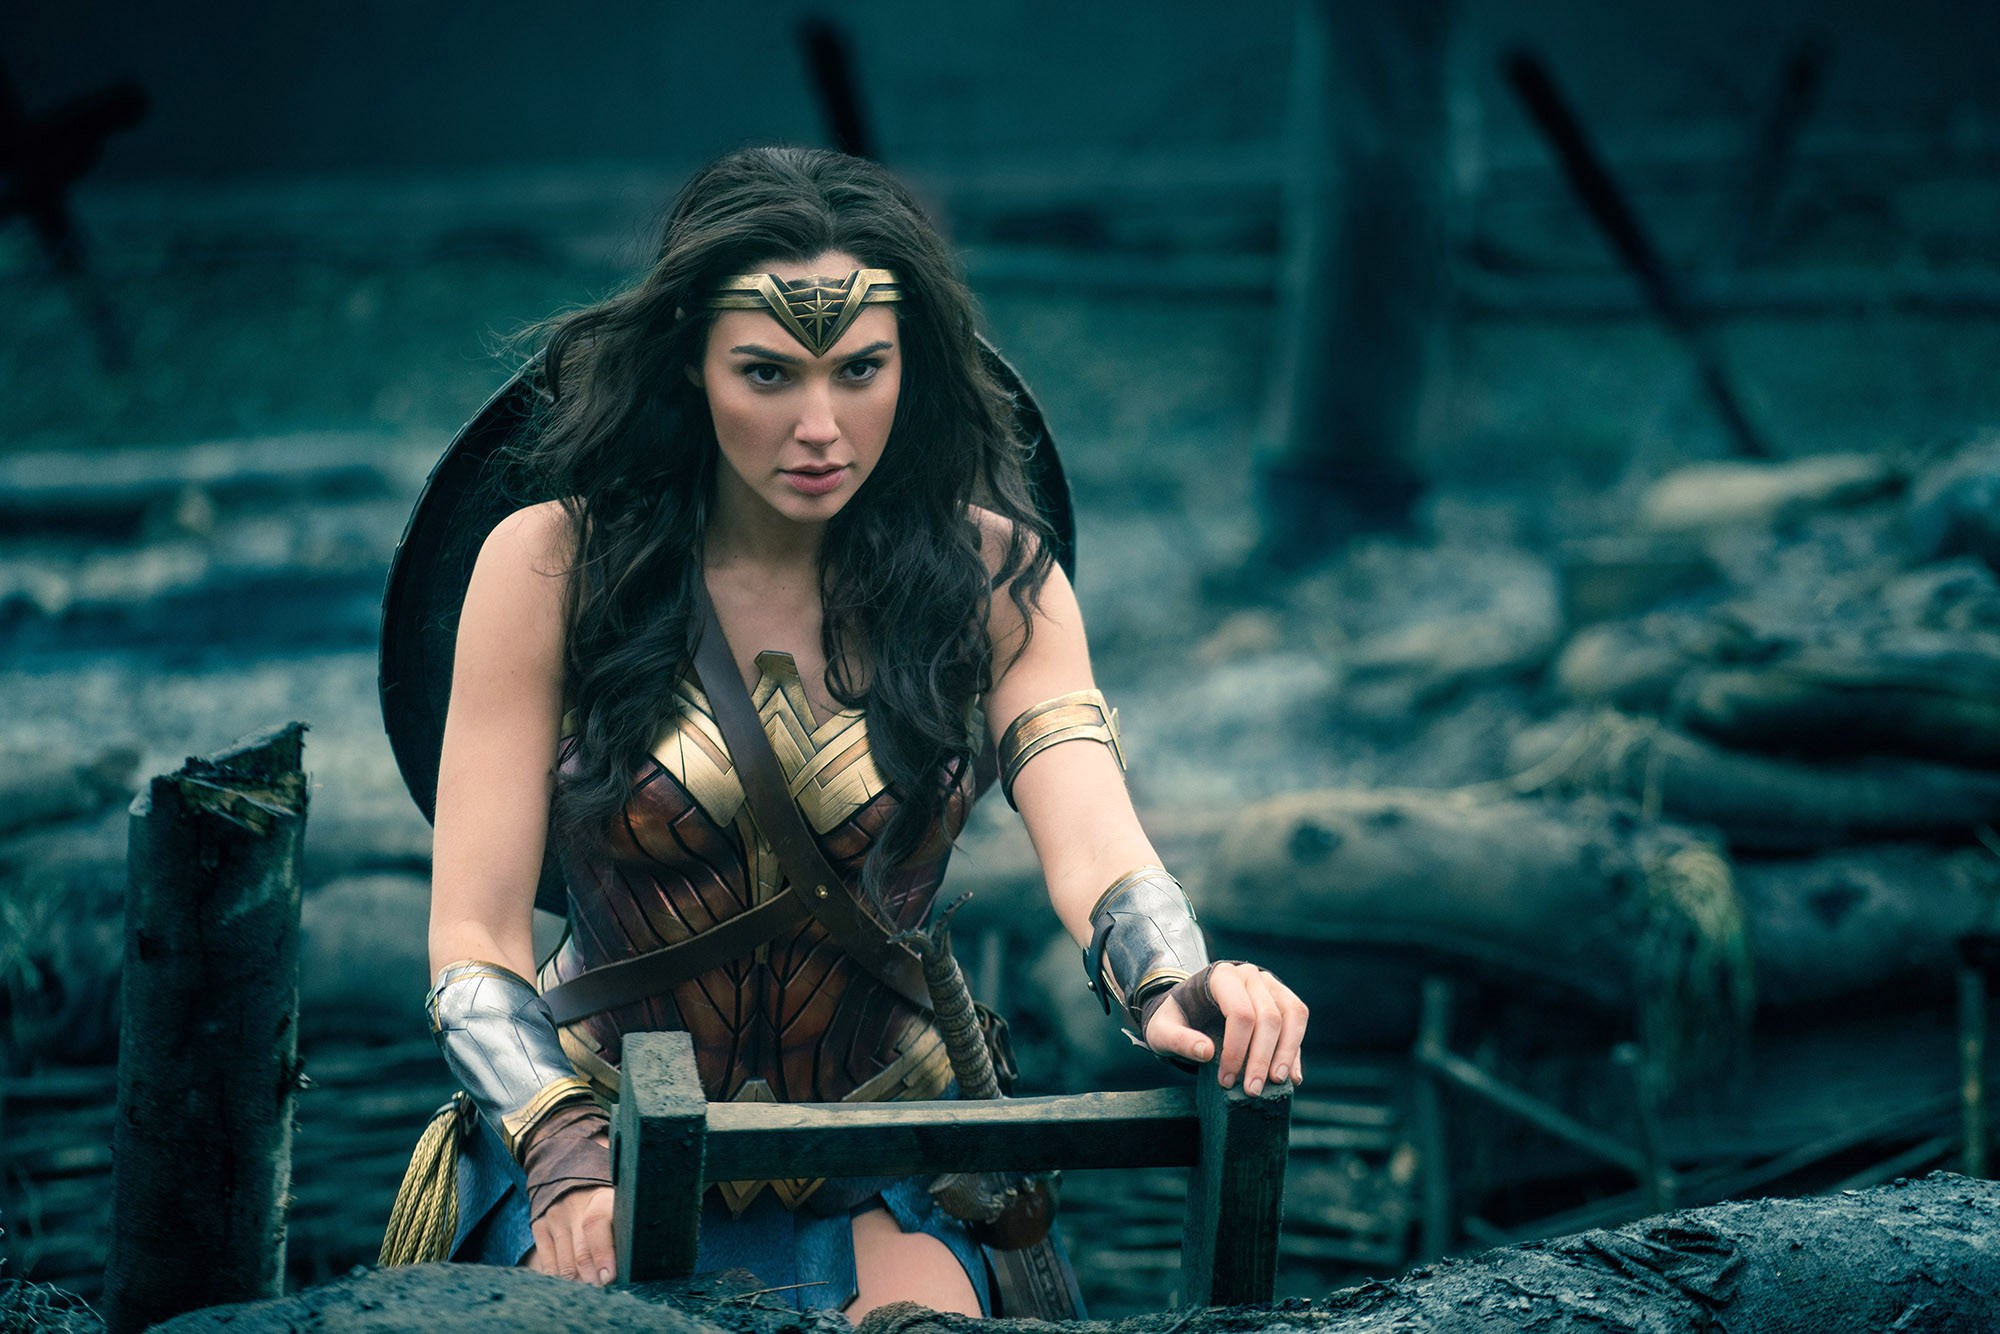 Sequel to superhero film directed by Patty Jenkins and starring Gal Gadot will be first to officially adopt guidelines put in place to combat Hollywood’s headline-grabbing harassment problem